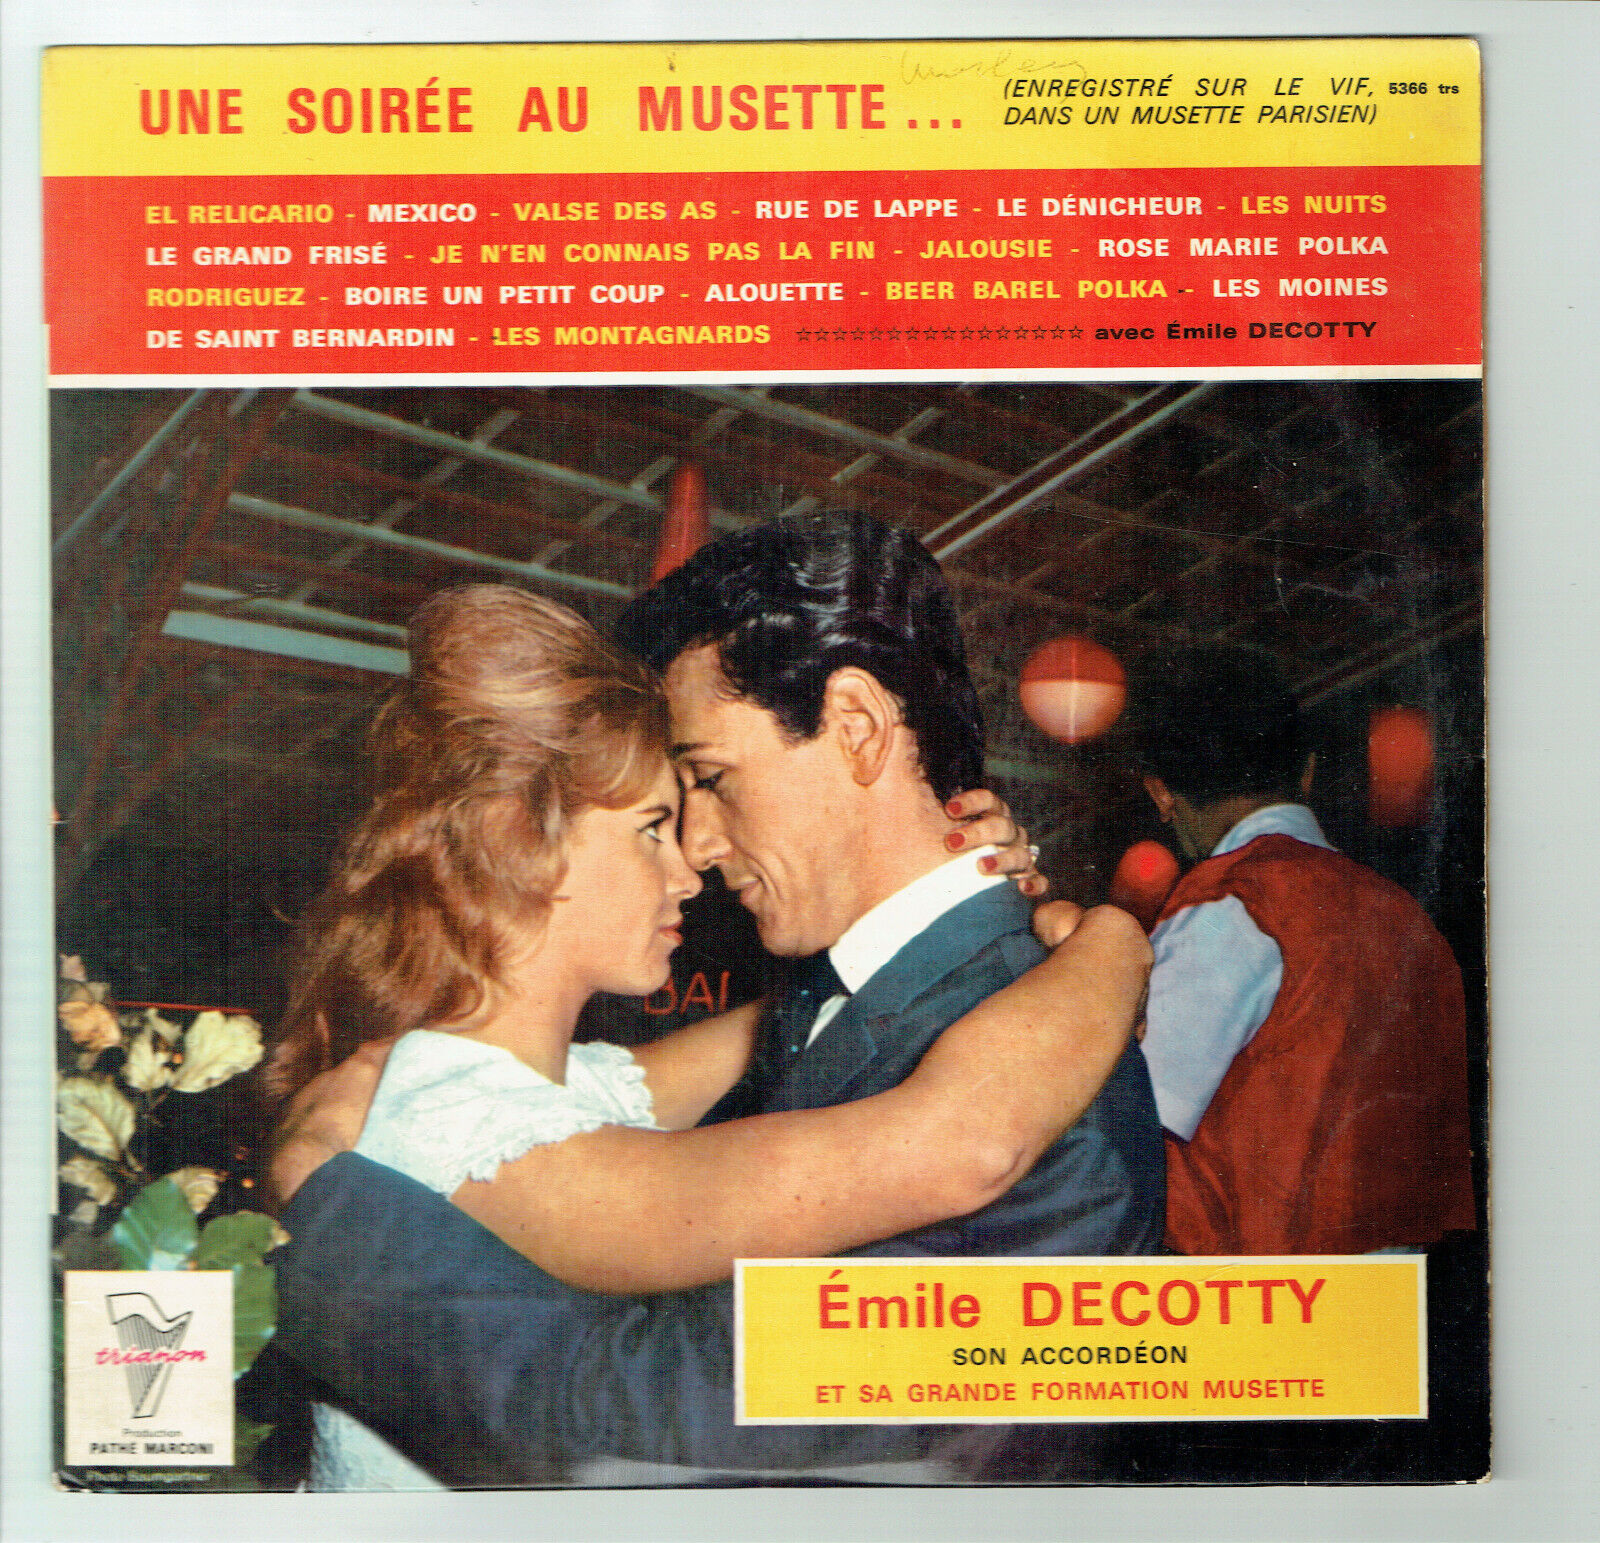 33 RPM 9 13/16in Emile Decotty Accordion Vinyl Une Soiree To Musette Couple